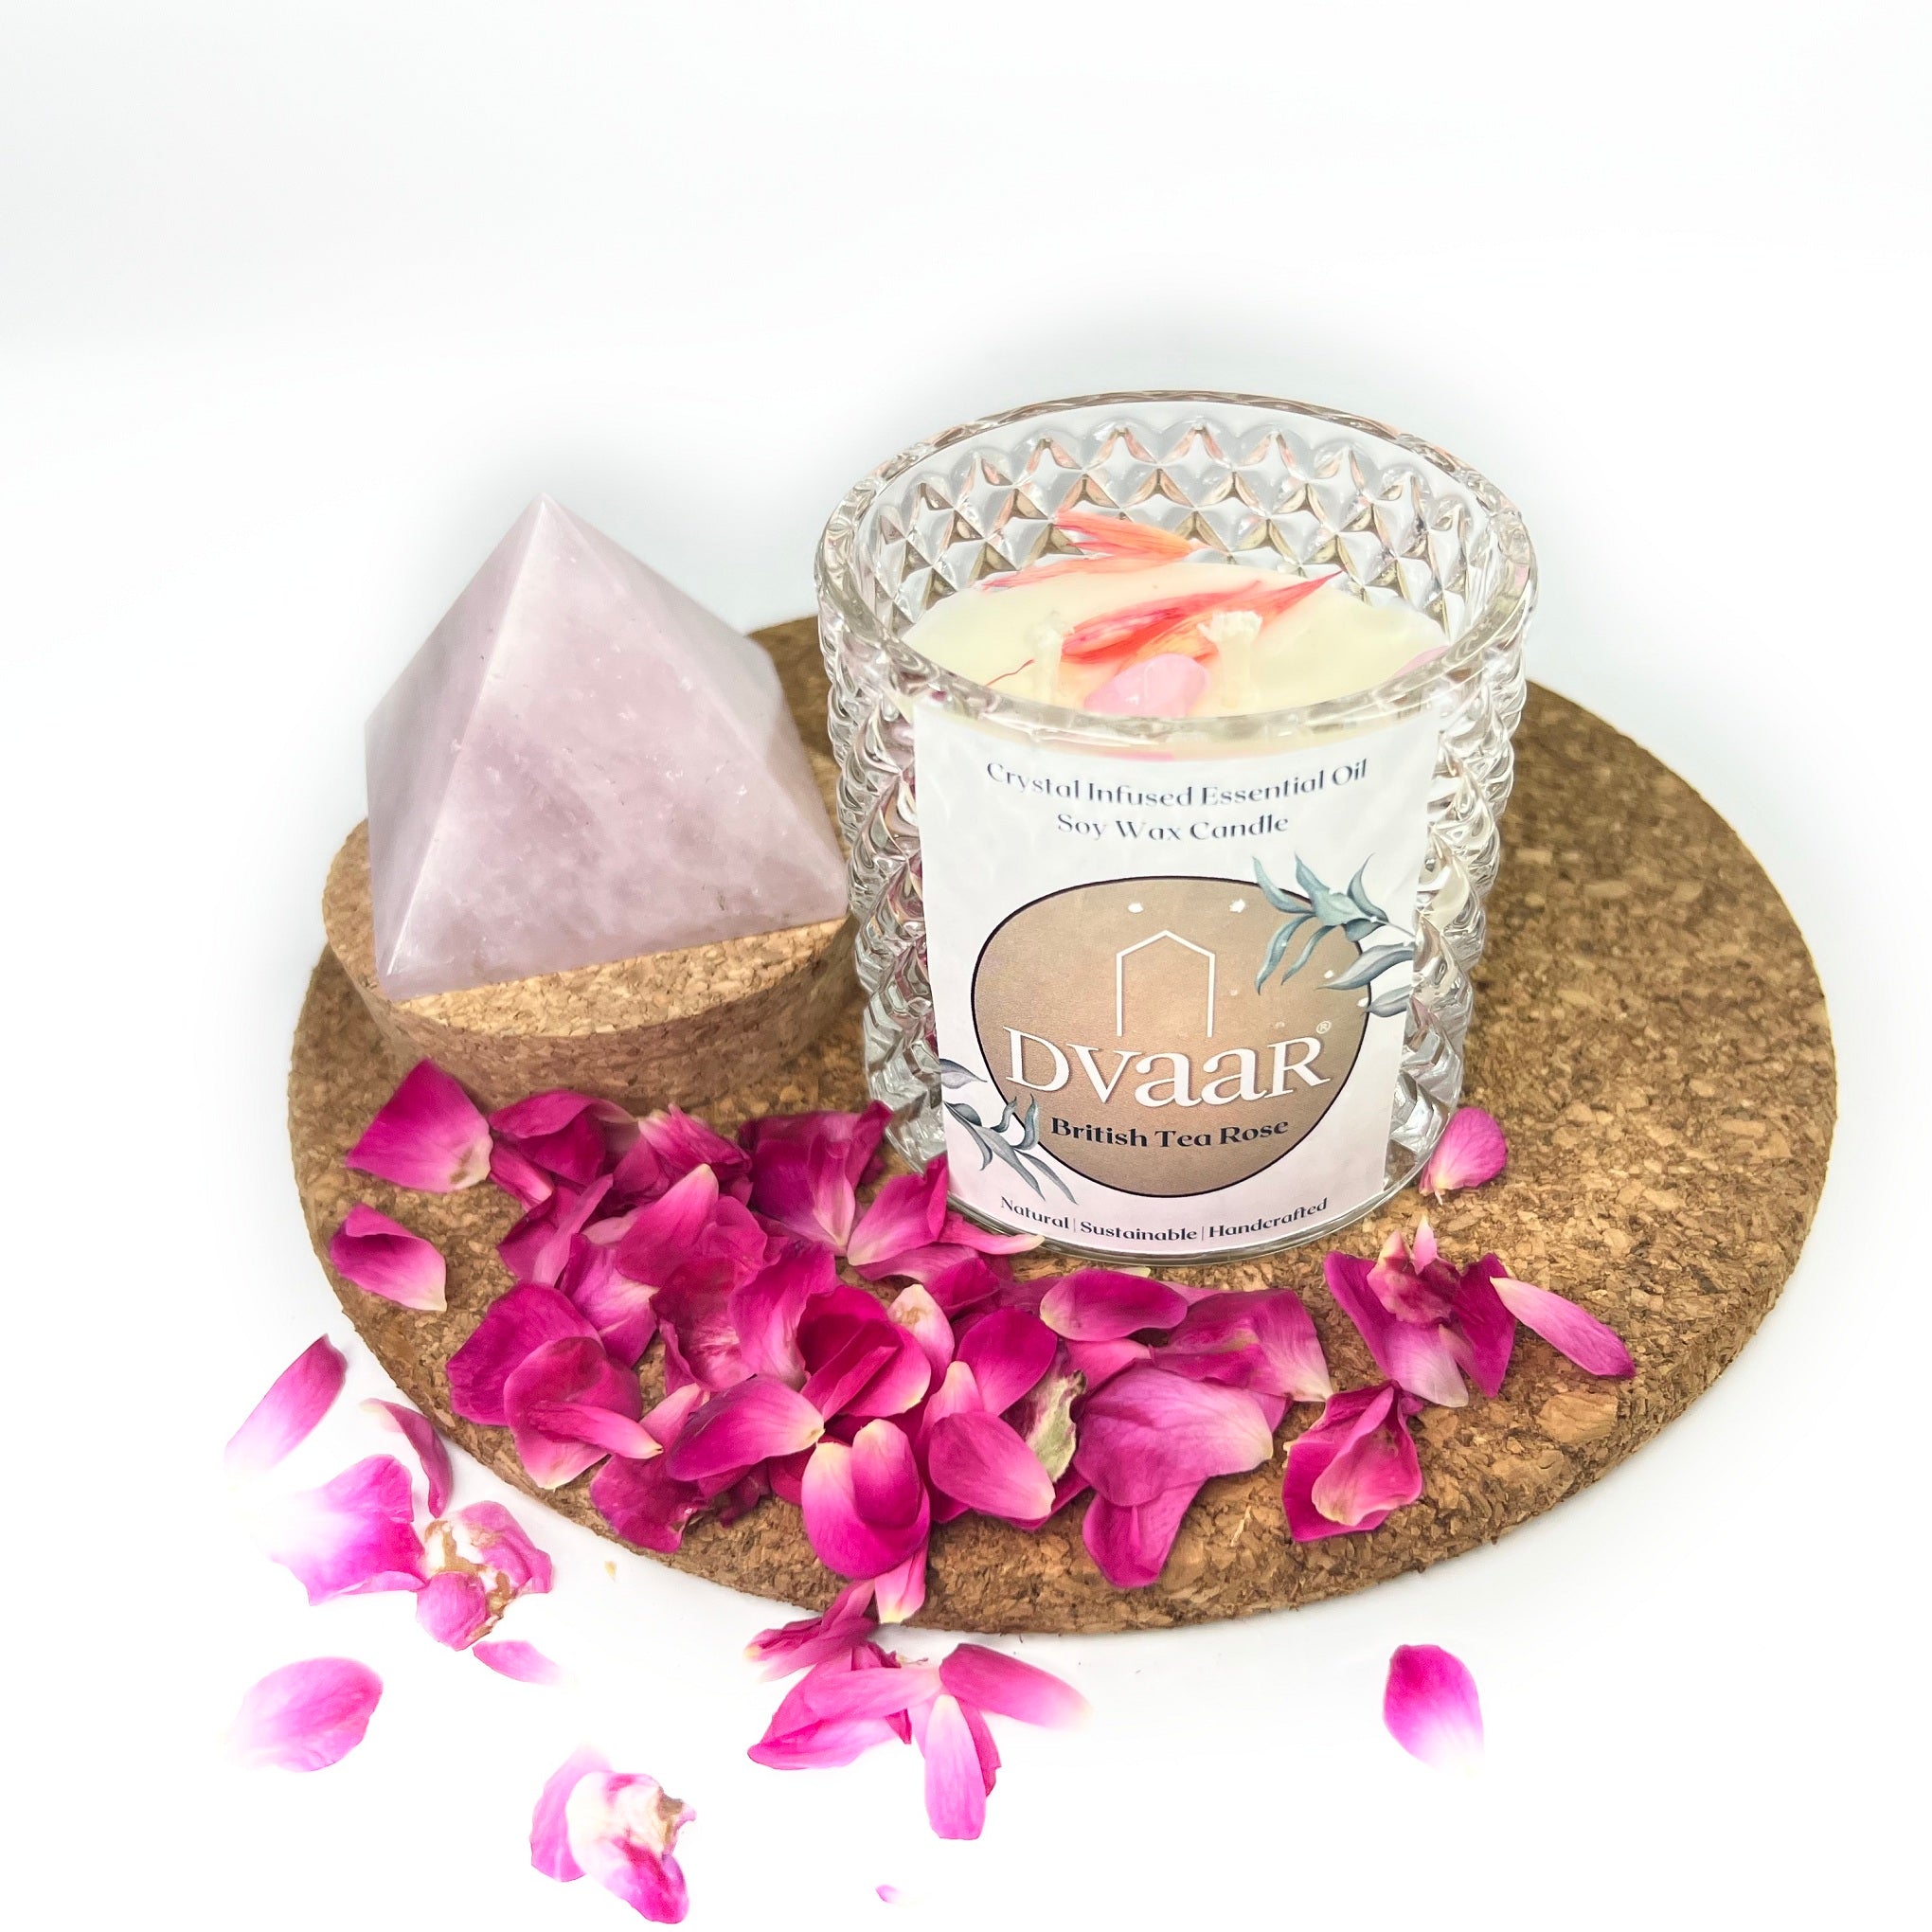 DVAAR SOYA WAX CANDLES SCENTED ECO FRIENDLY AROMATHERAPY MEDITATION HAND CRAFTED WITH NATURAL OILS CRYSTALS with GLASS JAR 280 GMS. FRAGRANCE-British Tea Rose